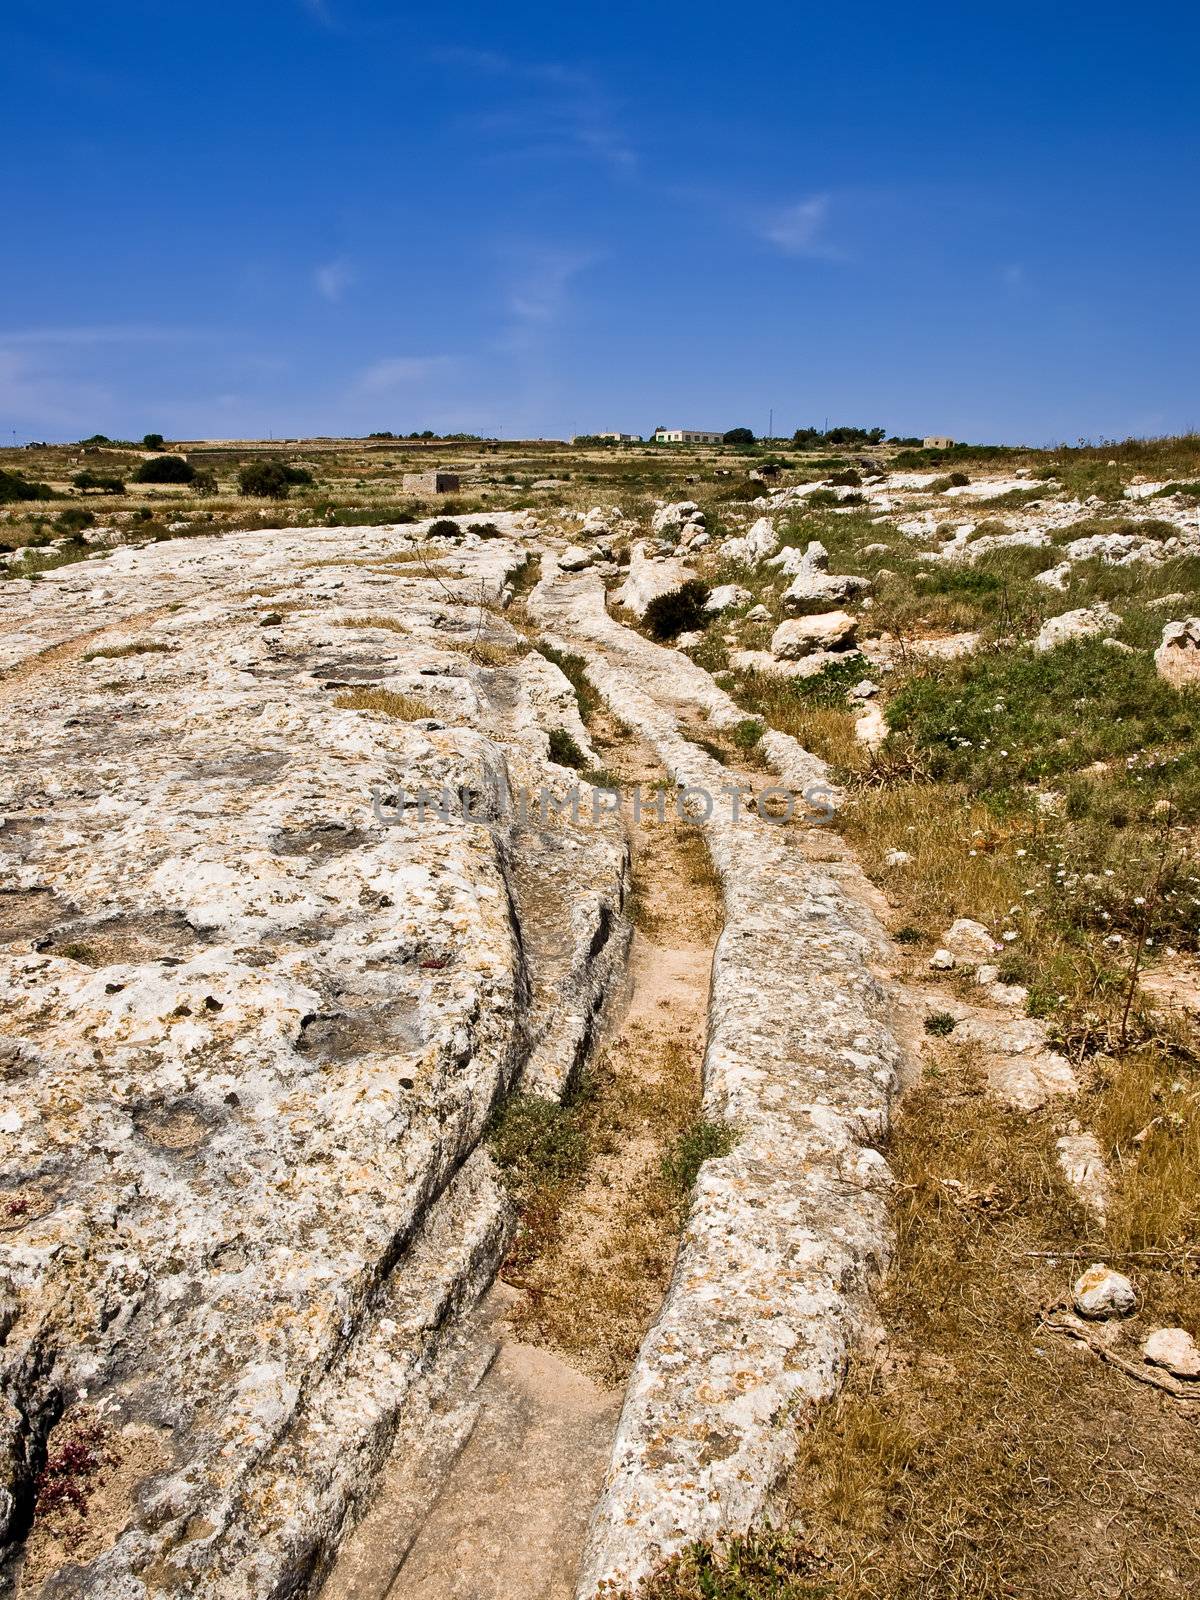 These rock hewn lines in Malta are a mystery similar to the Nazca lines